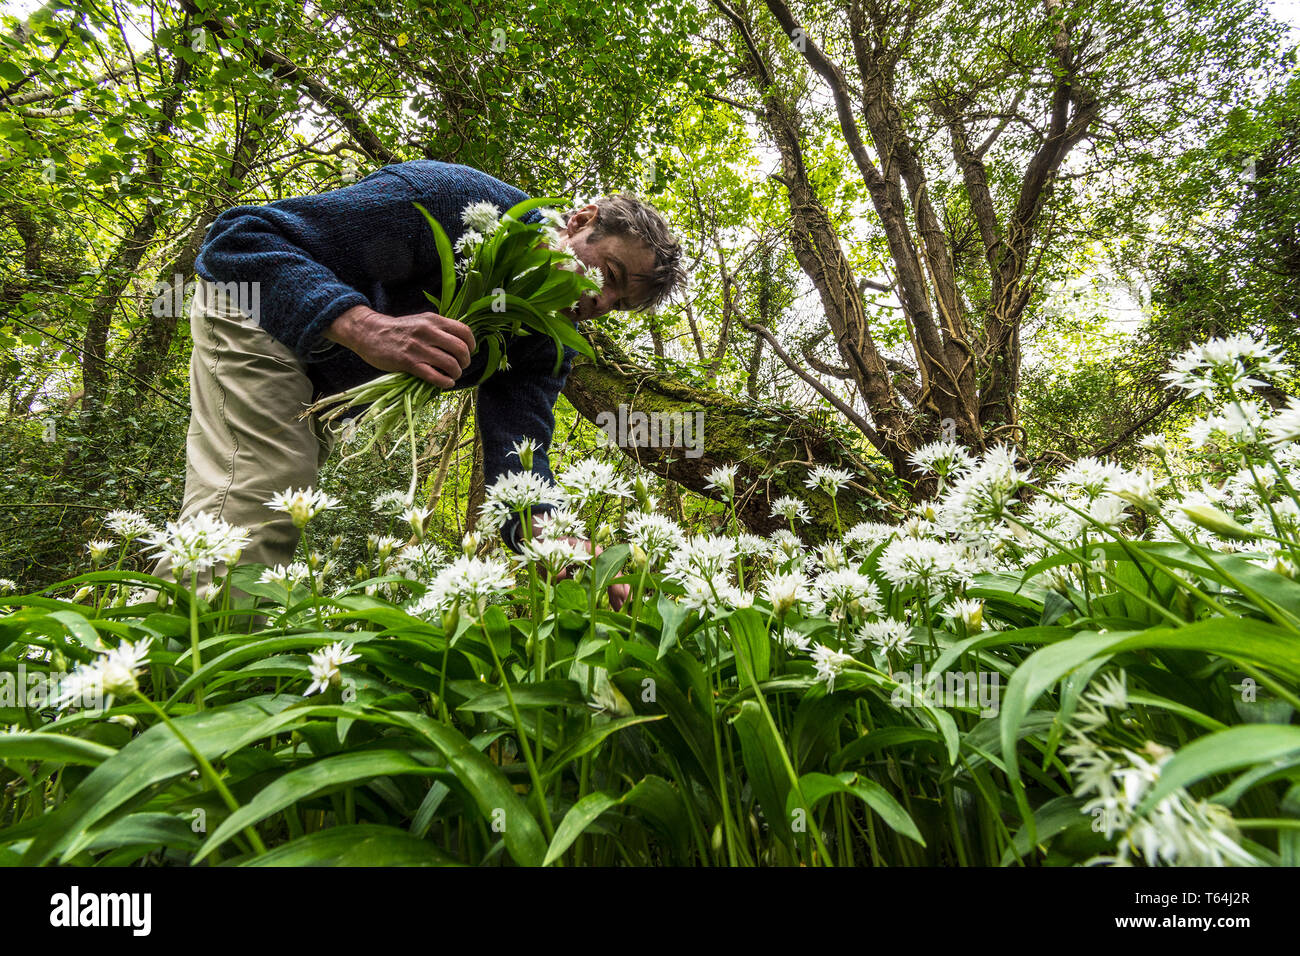 Ardara, County Donegal, Ireland. 29th April 2019. Foraging for wild garlic, 'Allium ursmum', know colloquially as 'ramsons', it has just begun to flower this spring. All parts of the plant are edible and foraging has become popular as a modern lifestyle choice in Ireland. Credit: Richard Wayman/Alamy Live News Stock Photo